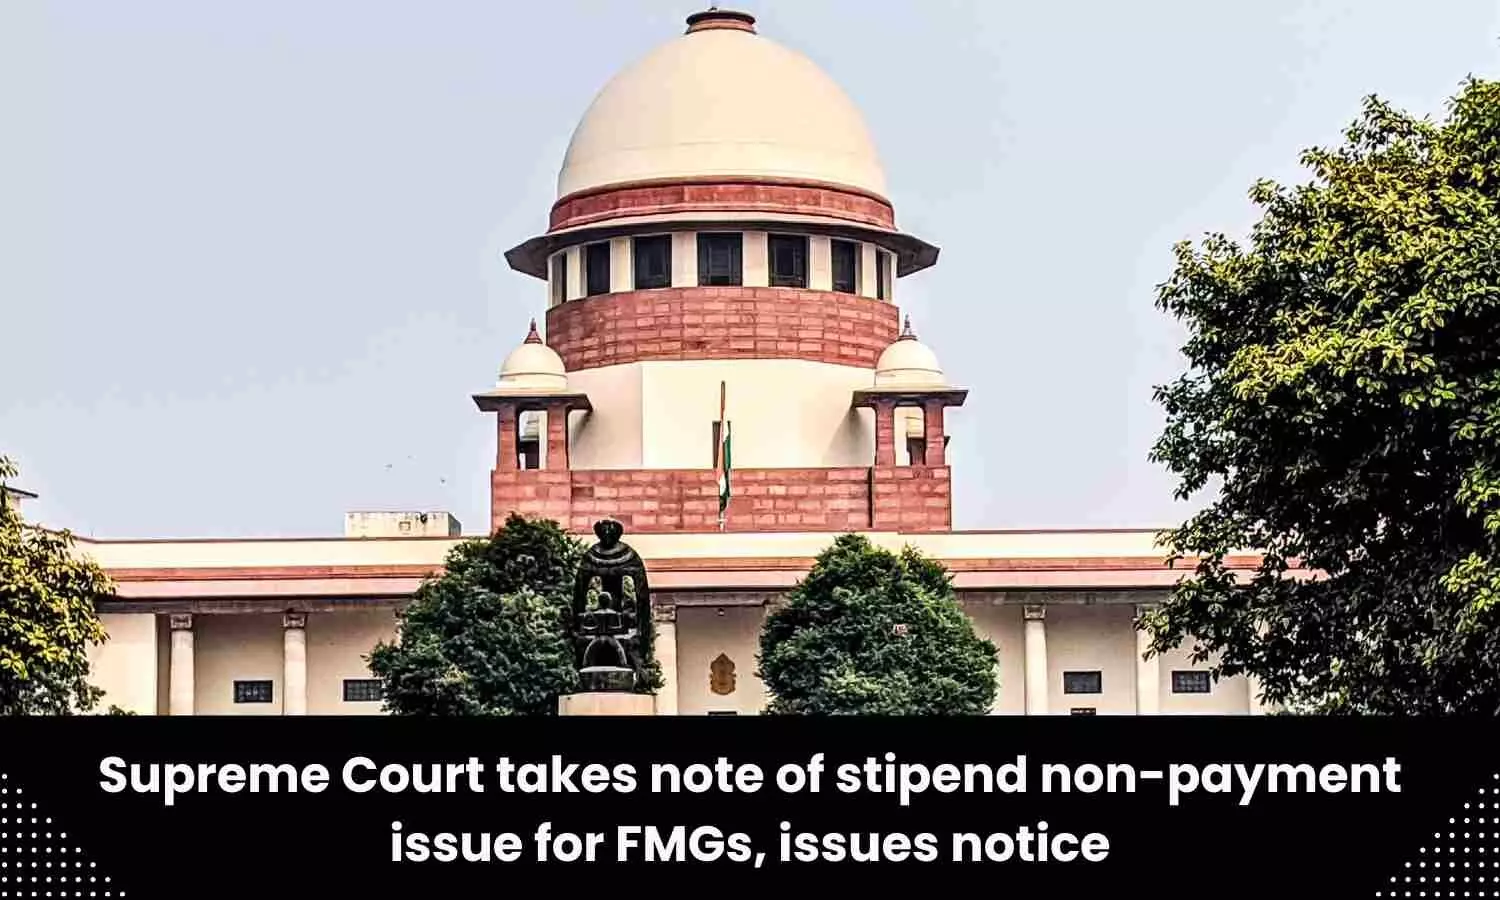 SC issues notice on FMGs plea challenging non-payment of stipend